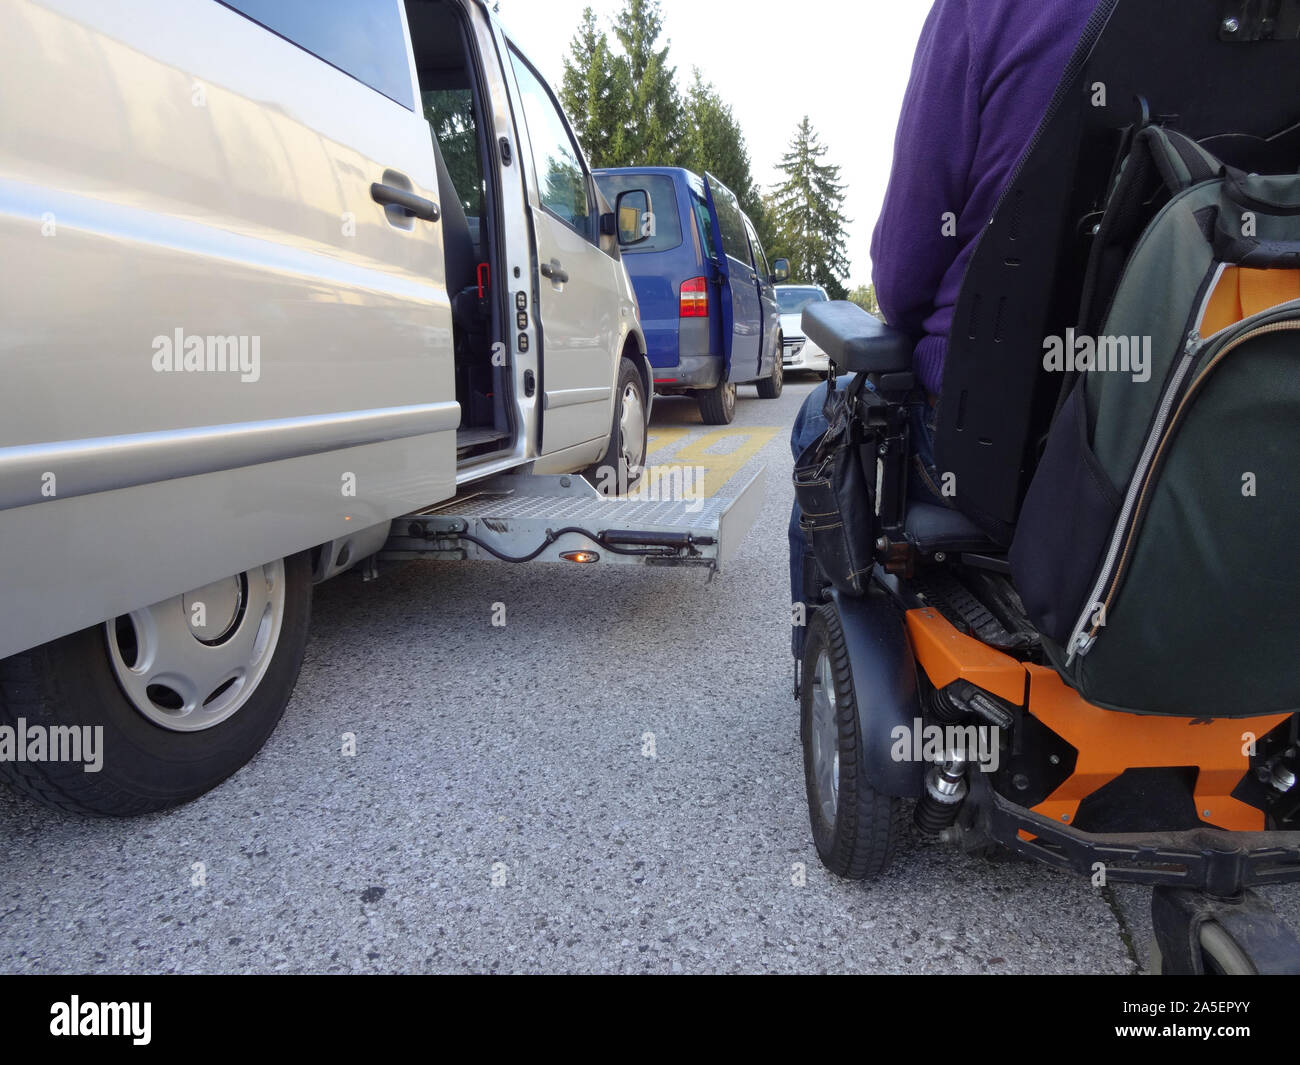 Disabled Men on Wheelchair using Accessible Vehicle with Lift Stock Photo